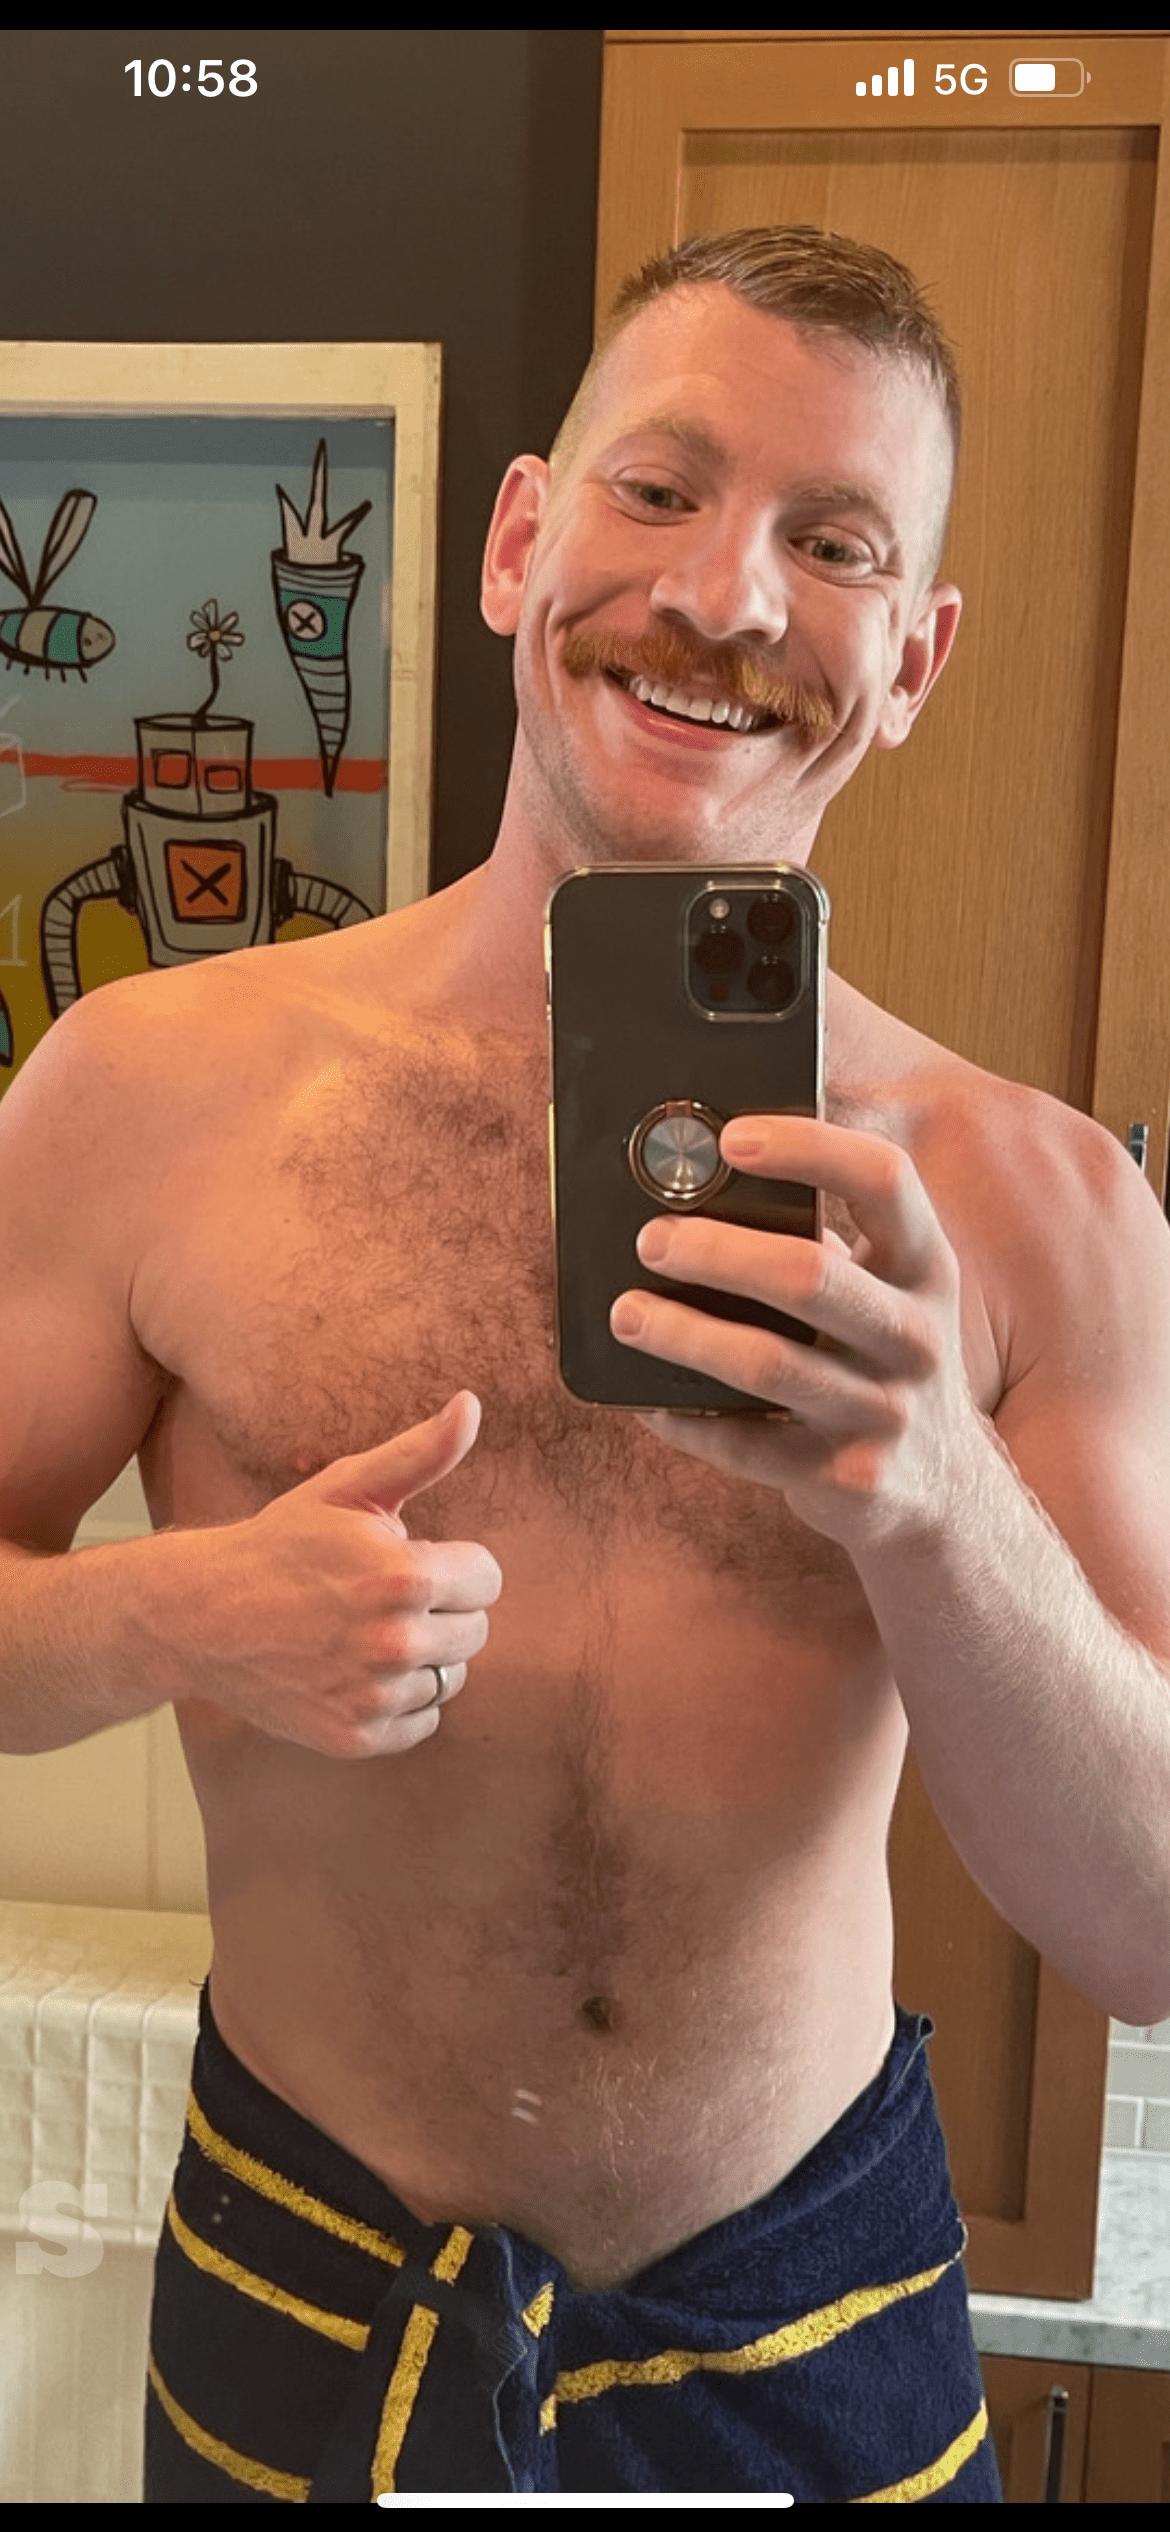 Photo by DirtyDaddyFunStuff with the username @DirtyDaddyPorn, who is a verified user,  April 28, 2024 at 12:59 AM and the text says 'Pizza and Anal #ginger #muscles #leather'